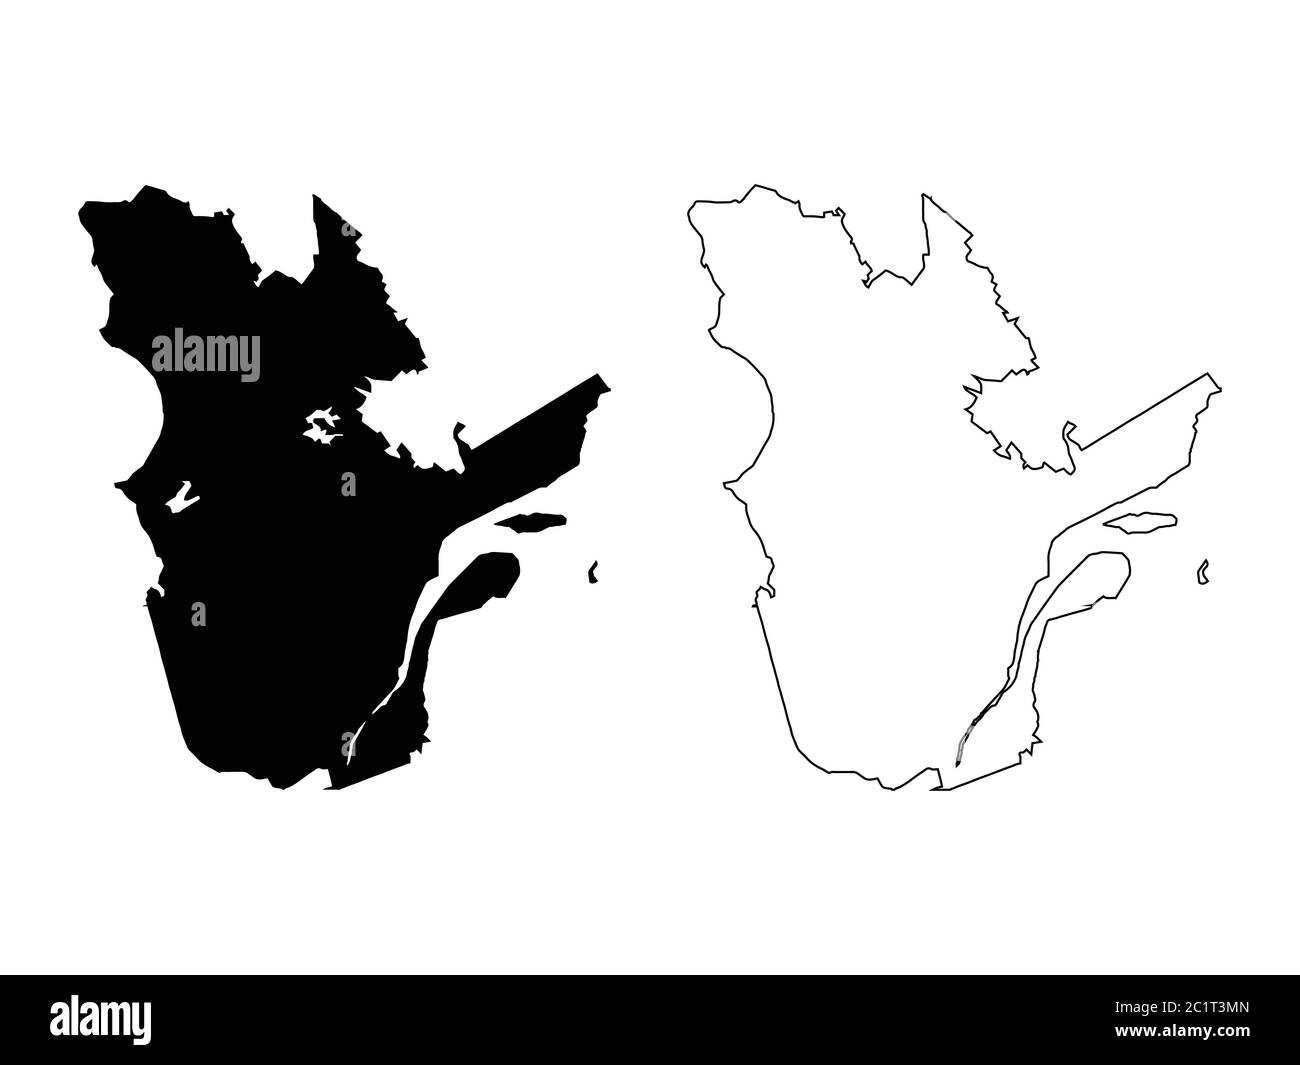 Quebec Province and Territory of Canada. Black Illustration and Outline. Isolated on a White Background. EPS Vector Stock Vector